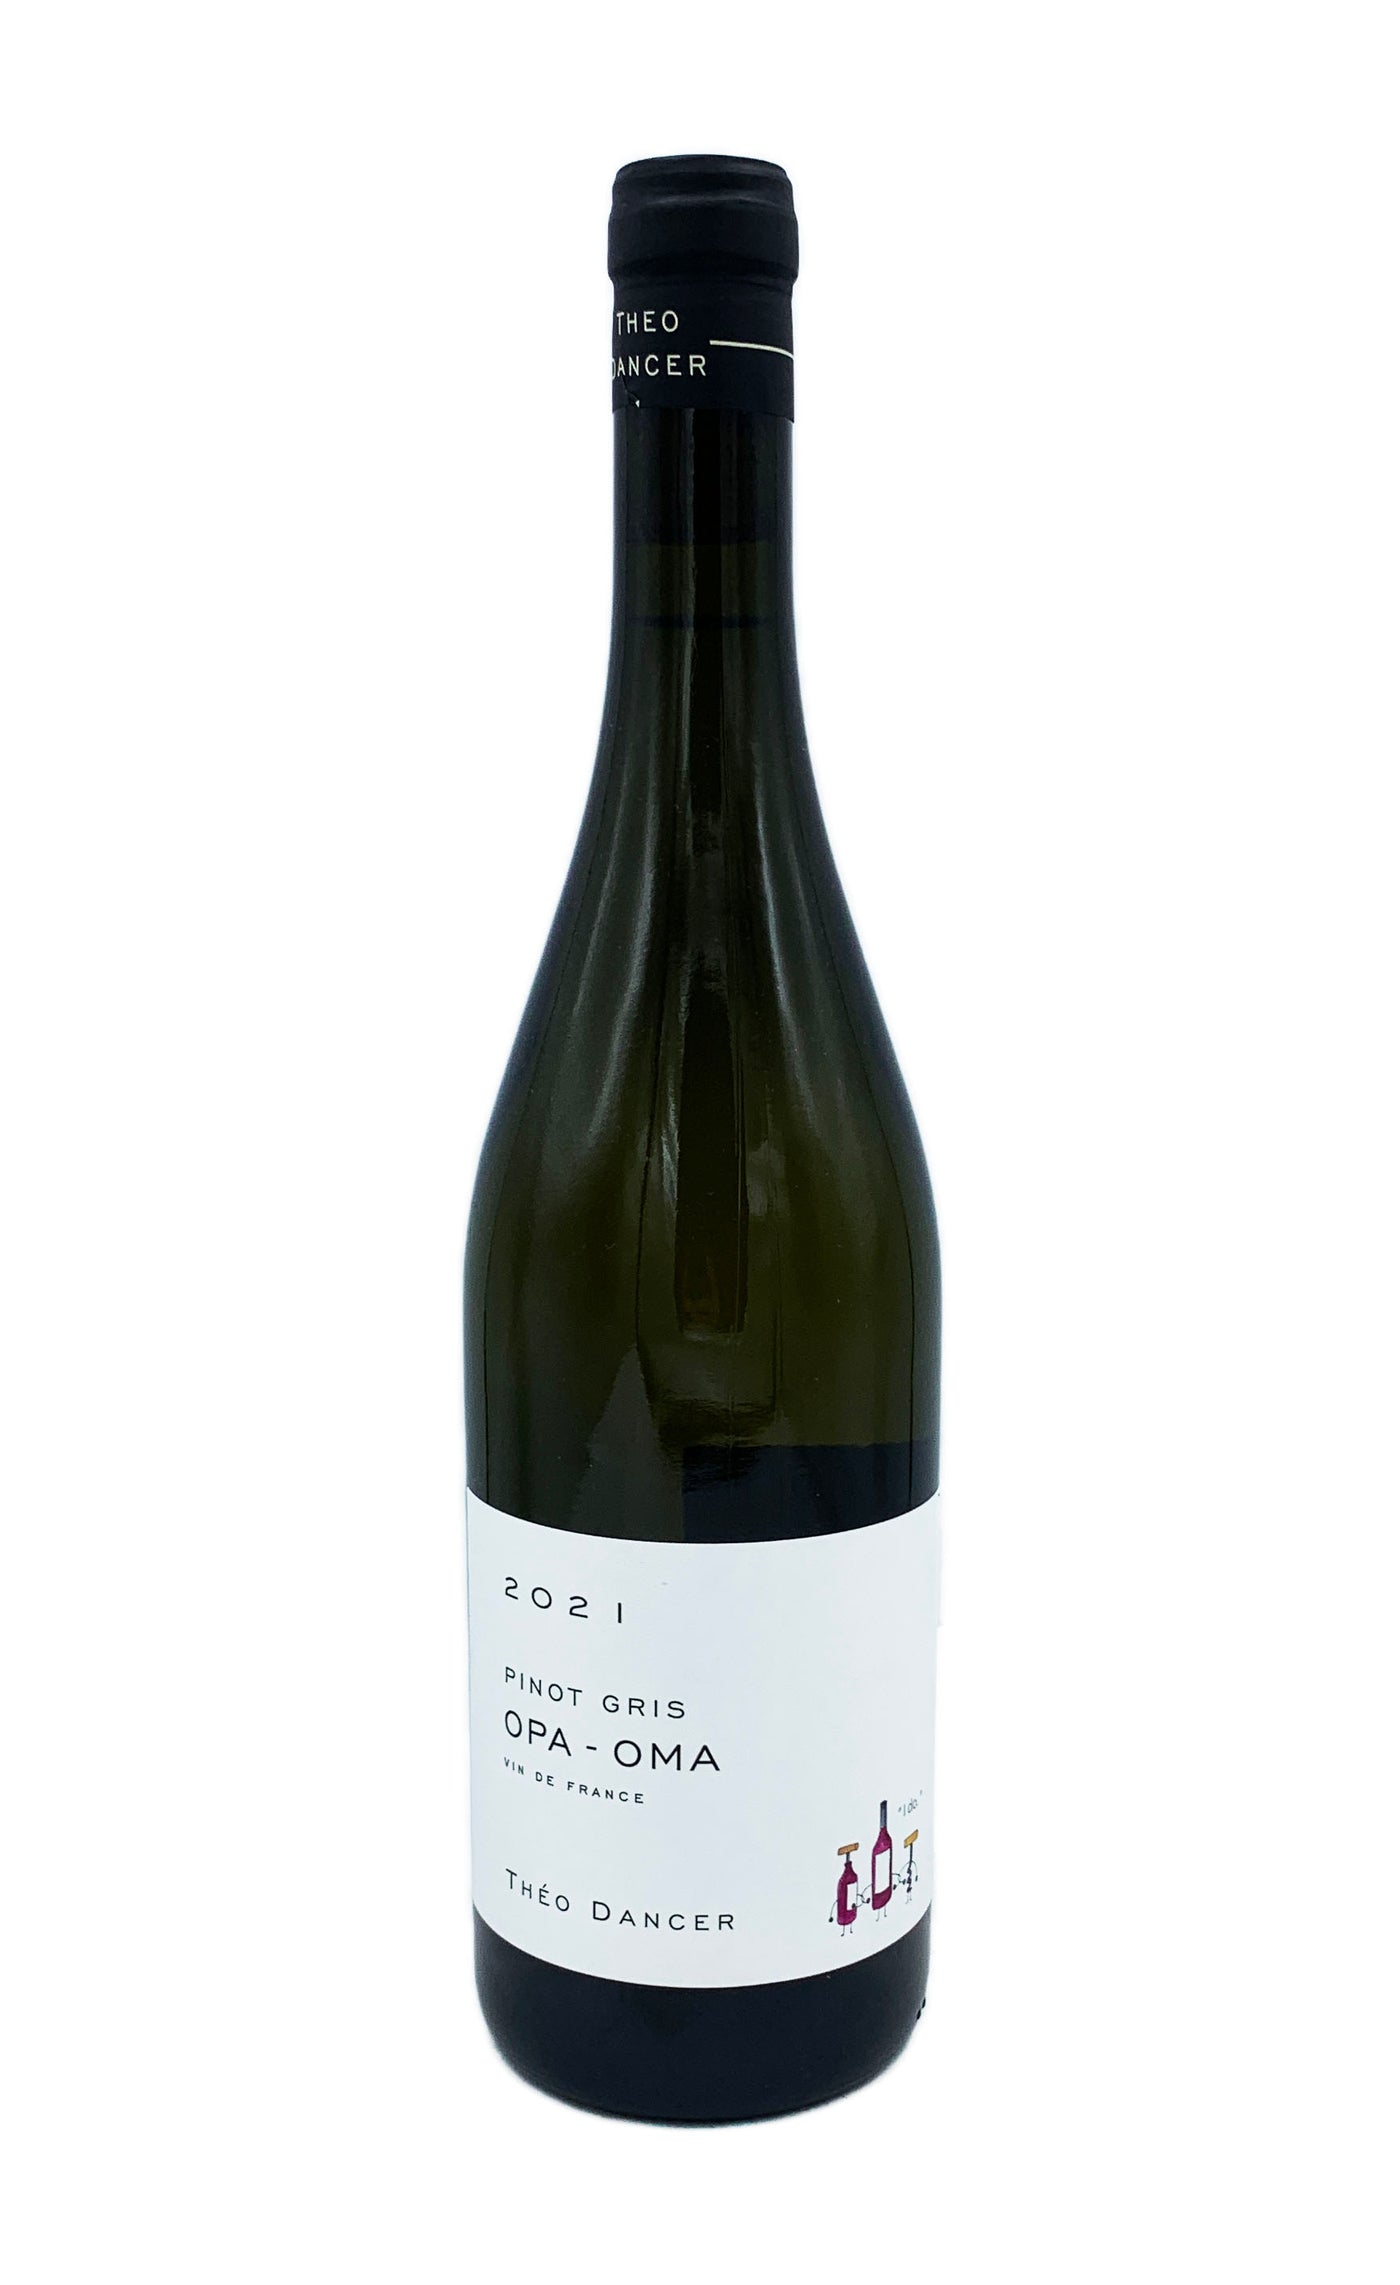 Theo Dancer Pinot Gris Opa-Oma 2021